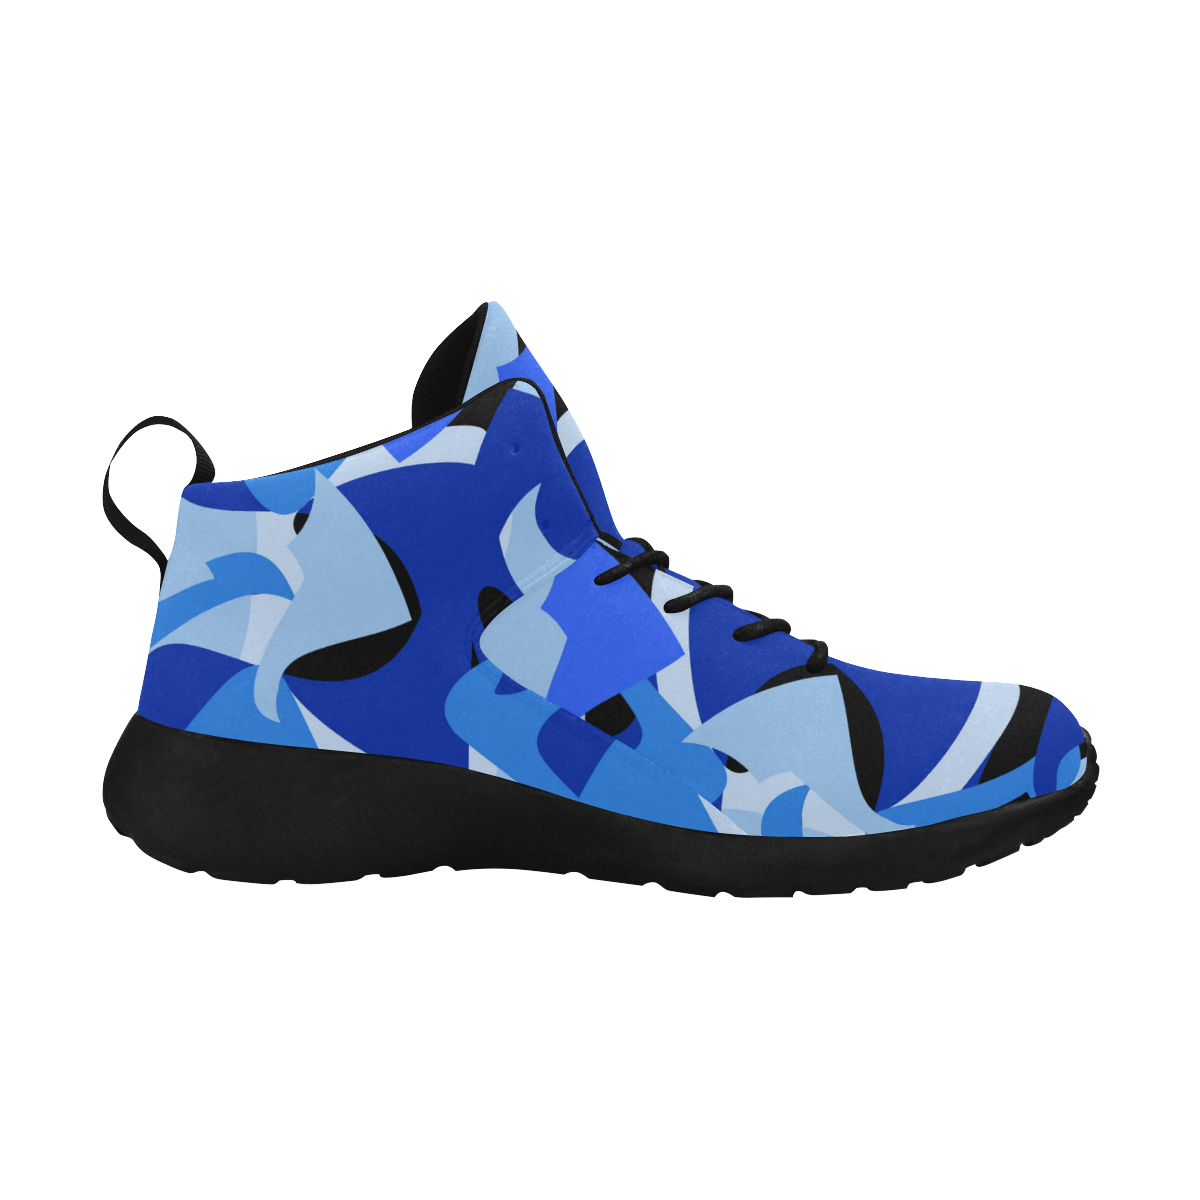 Camouflage Abstract Blue and Black Men's Chukka Training Shoes (Model 57502)